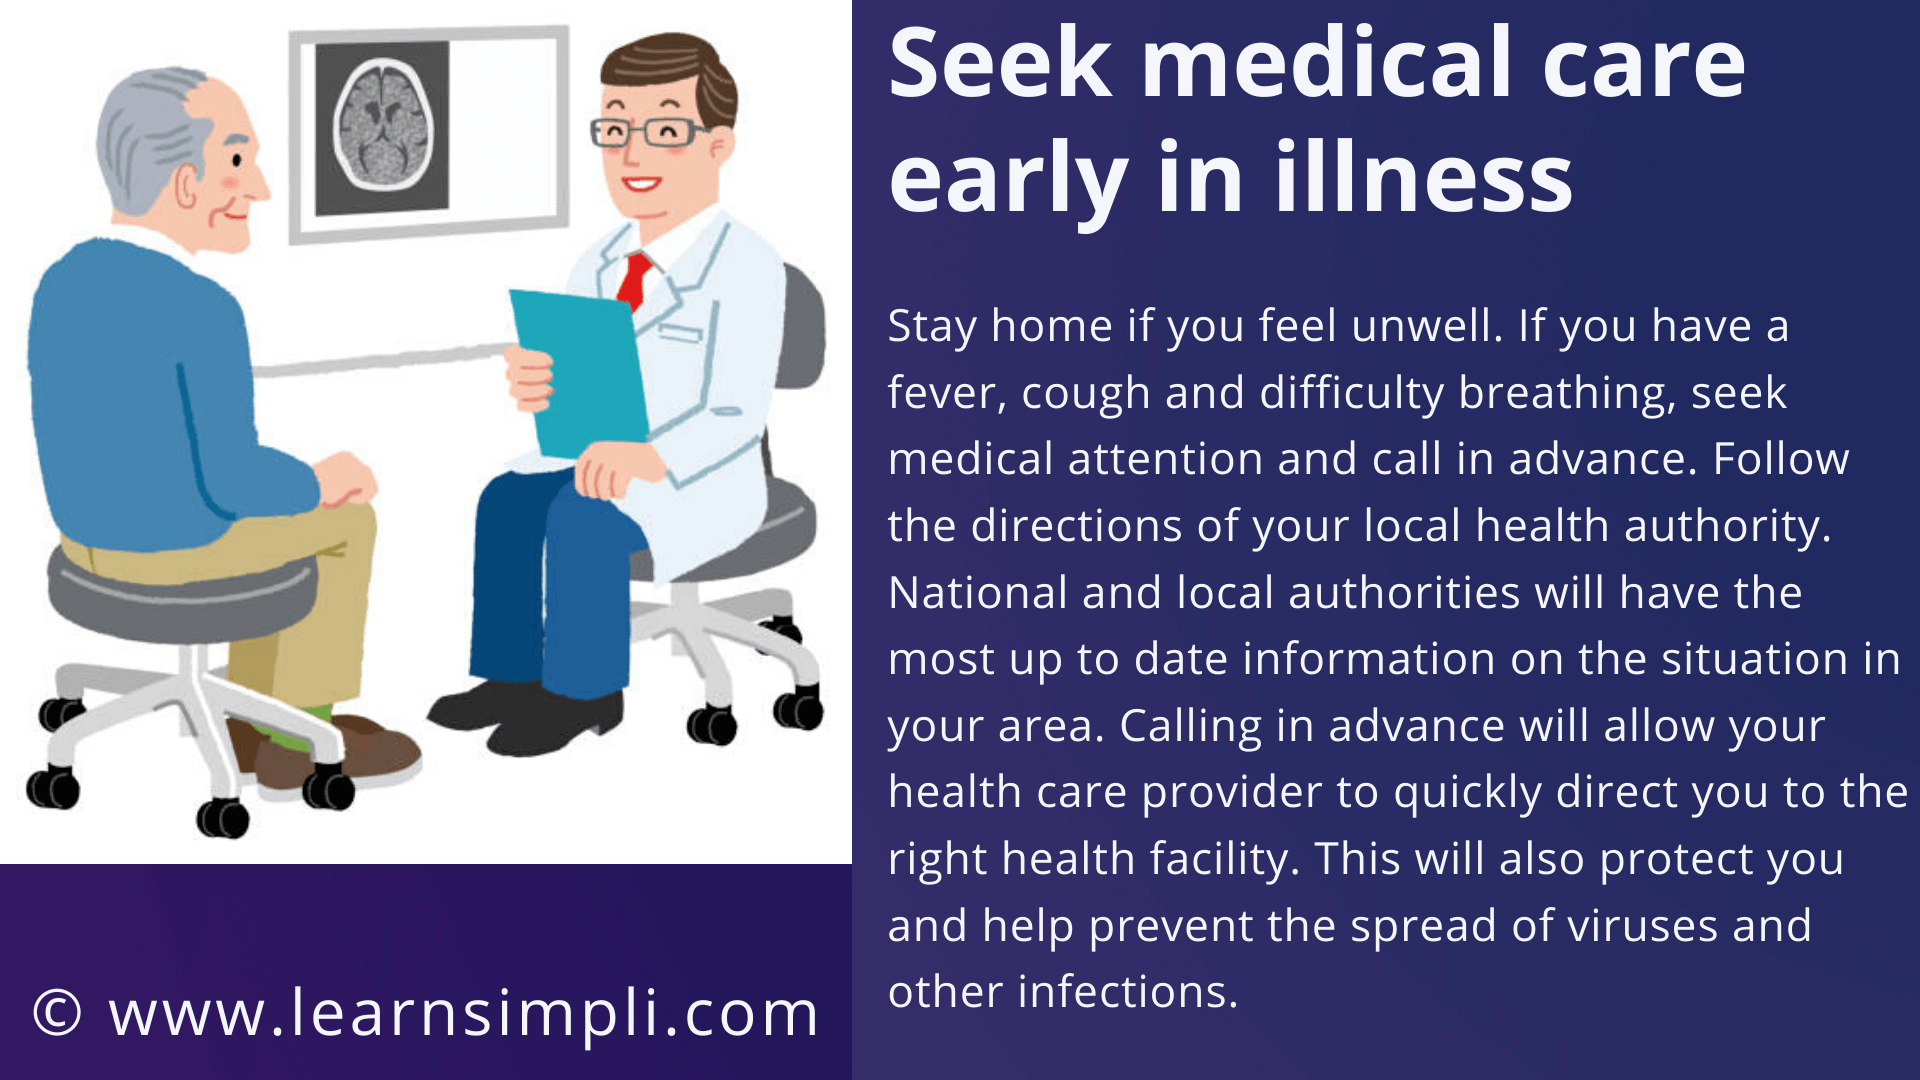 Seek medical care early in illness